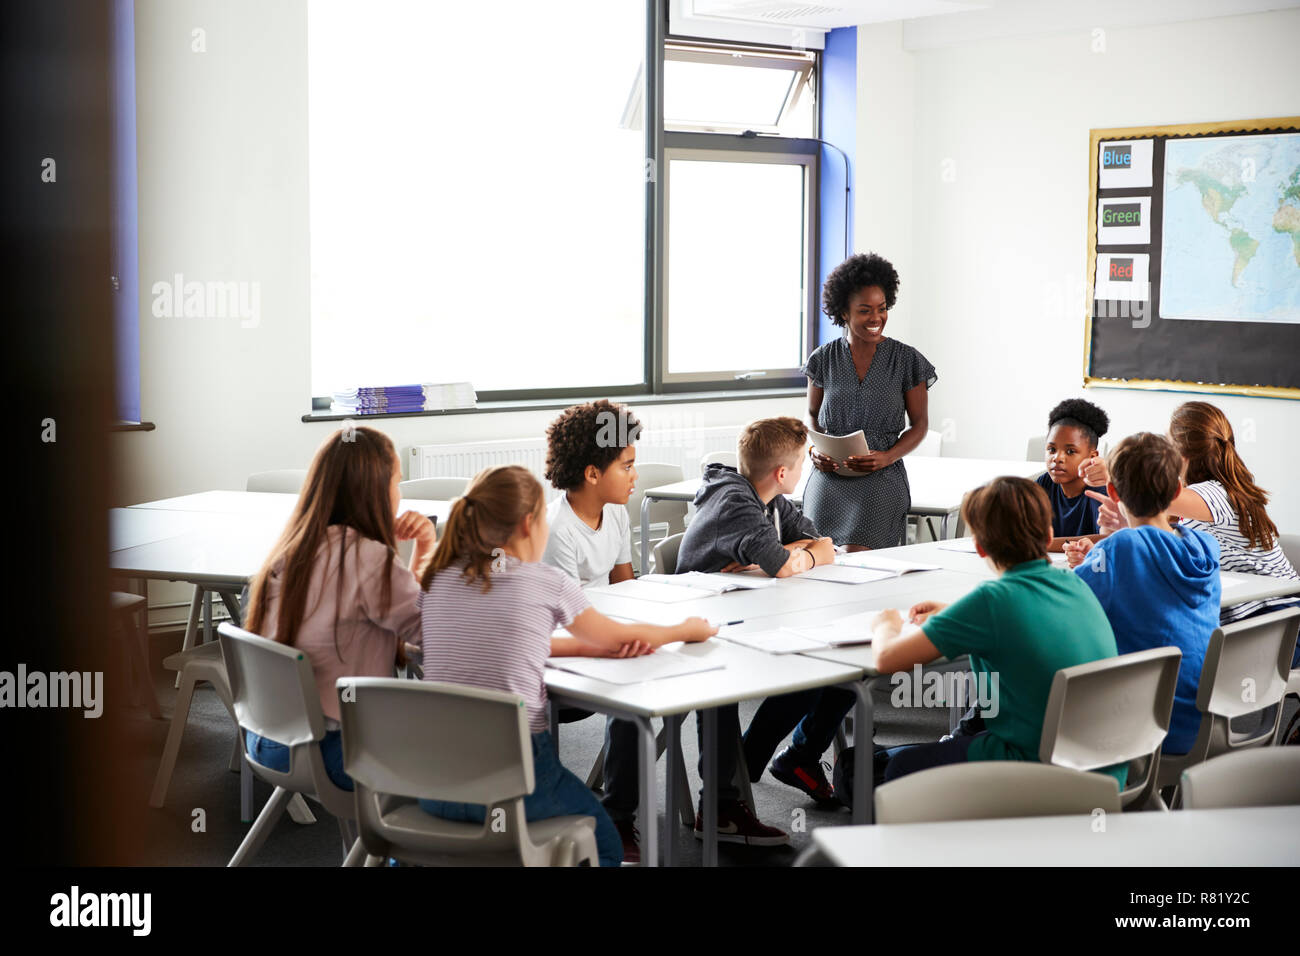 Female High School Tutor Standing By Table With Students Teaching Lesson Stock Photo